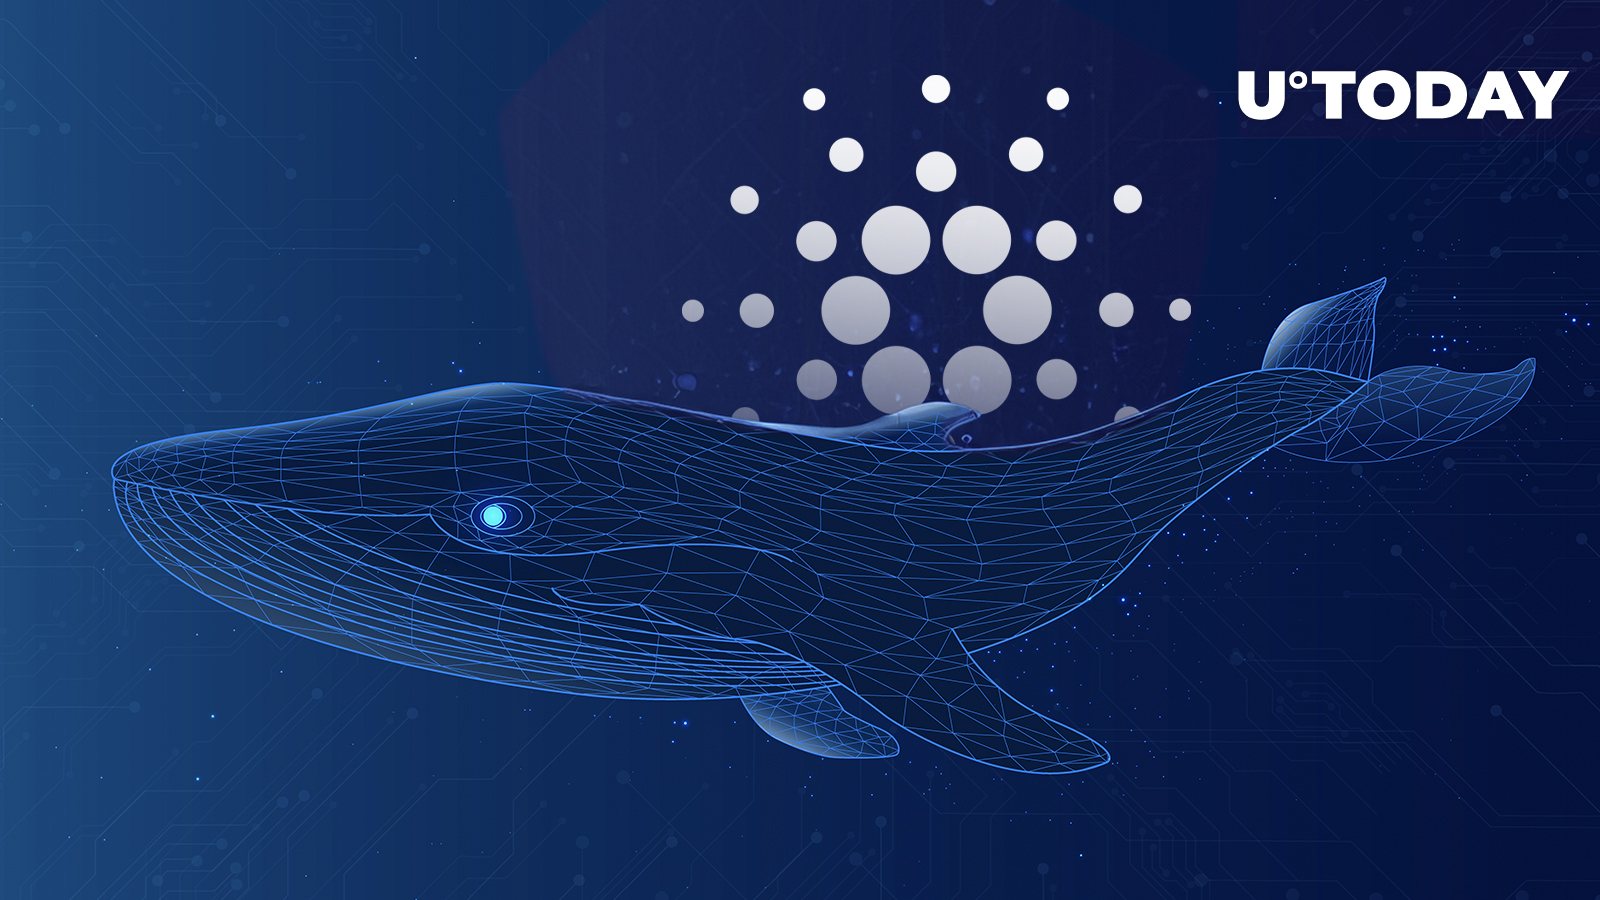 Cardano Whales Dump 1 Billion Tokens, What’s Next for ADA Price?